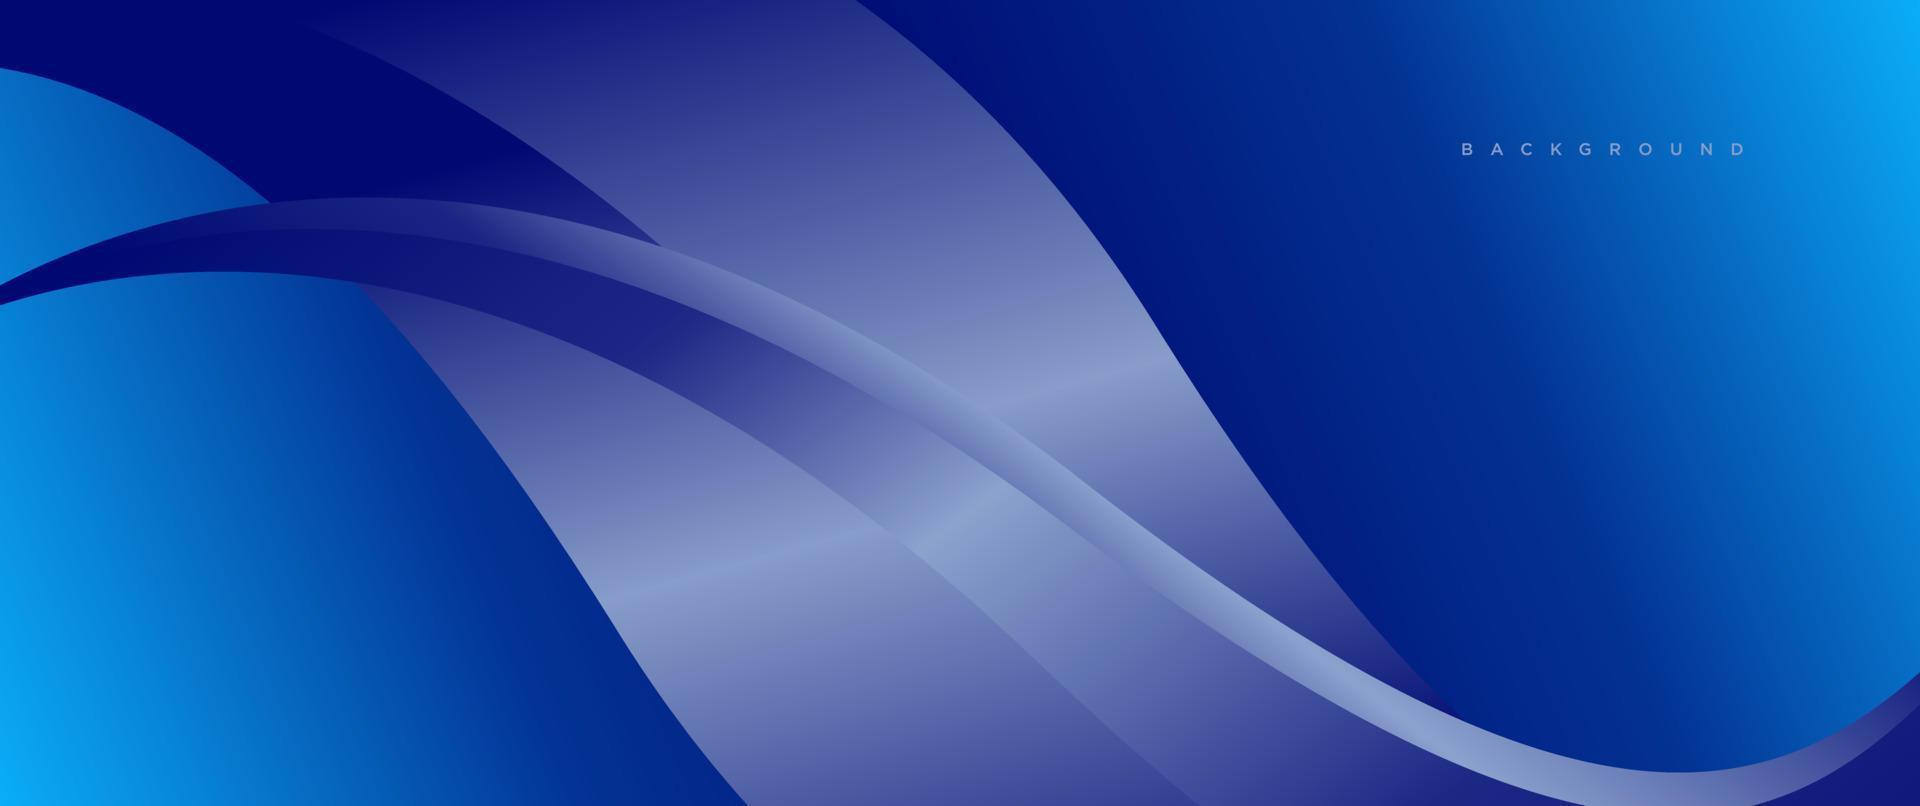 Smooth flow of wavy shapes with gradient vector abstract background, energy movement dark blue design curved lines, relaxing music or technology sound.